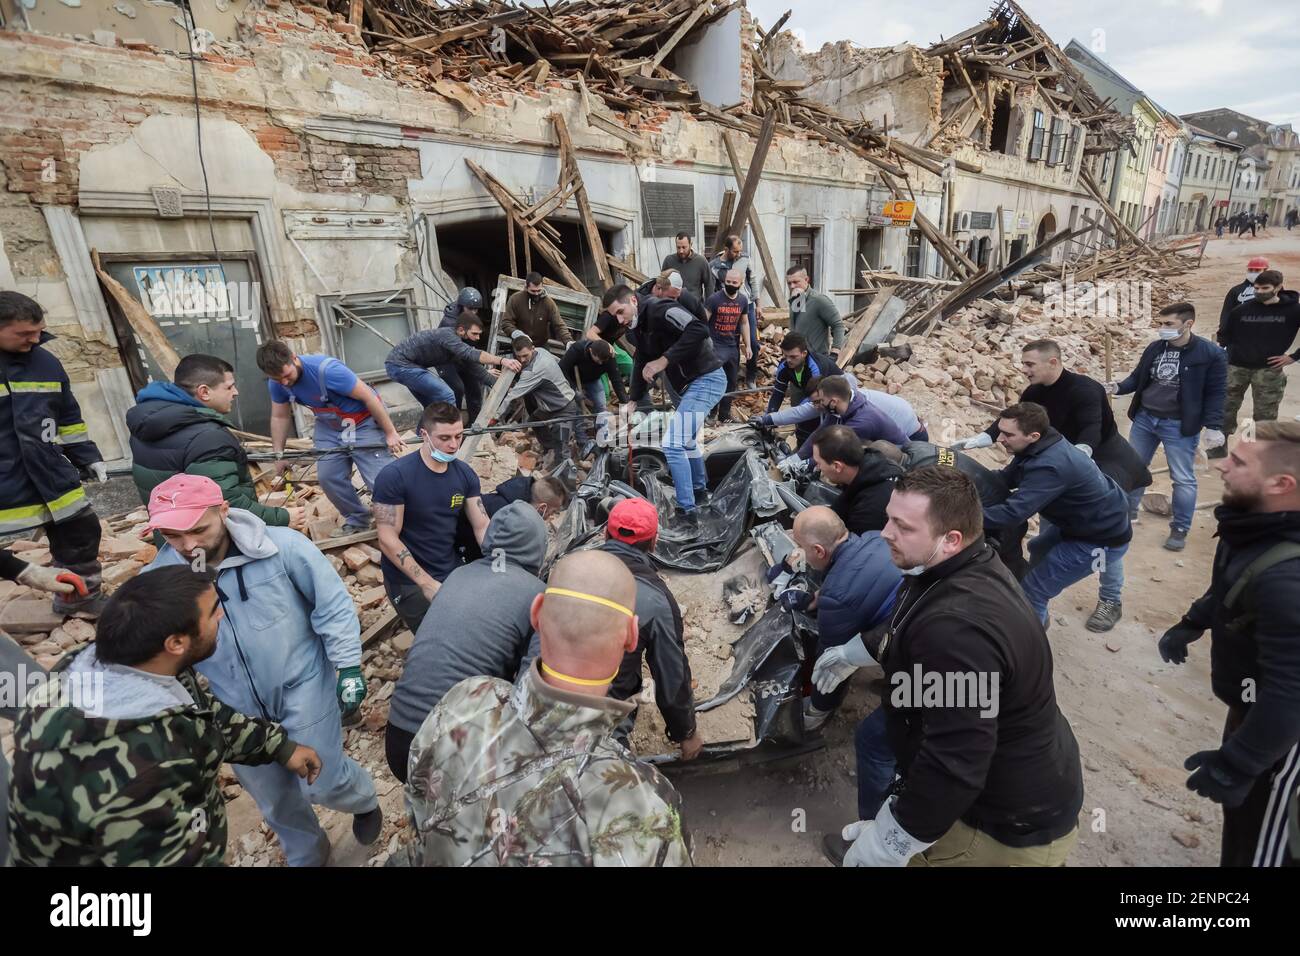 A catastrophic earthquake measuring 6.3 hit Petrinja and was felt in most of the country. So far 7 people died during earthquake. In the photo: People Stock Photo